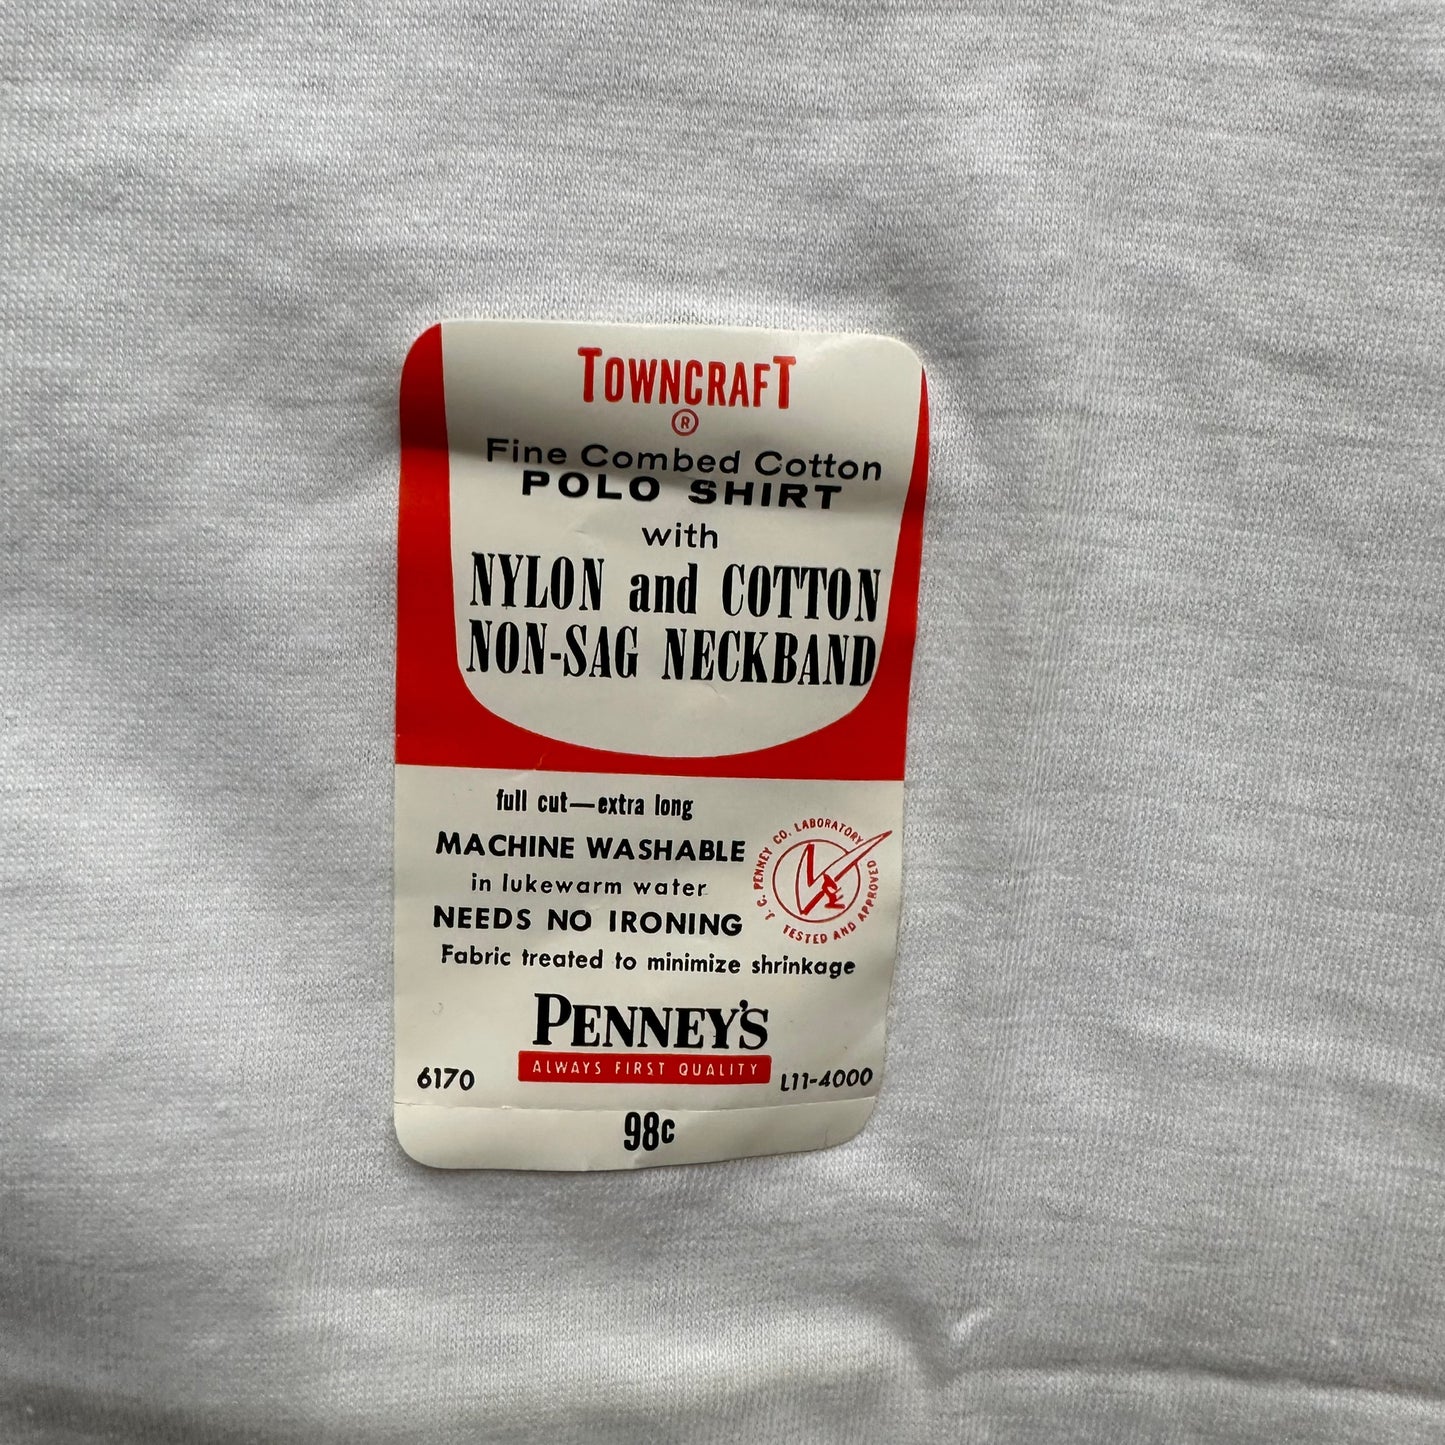 Tag on Vintage NWT Penneys Towncraft Tee Shirt SZ M | Vintage Blank Tees Seattle | Vintage T-Shirts Seattle